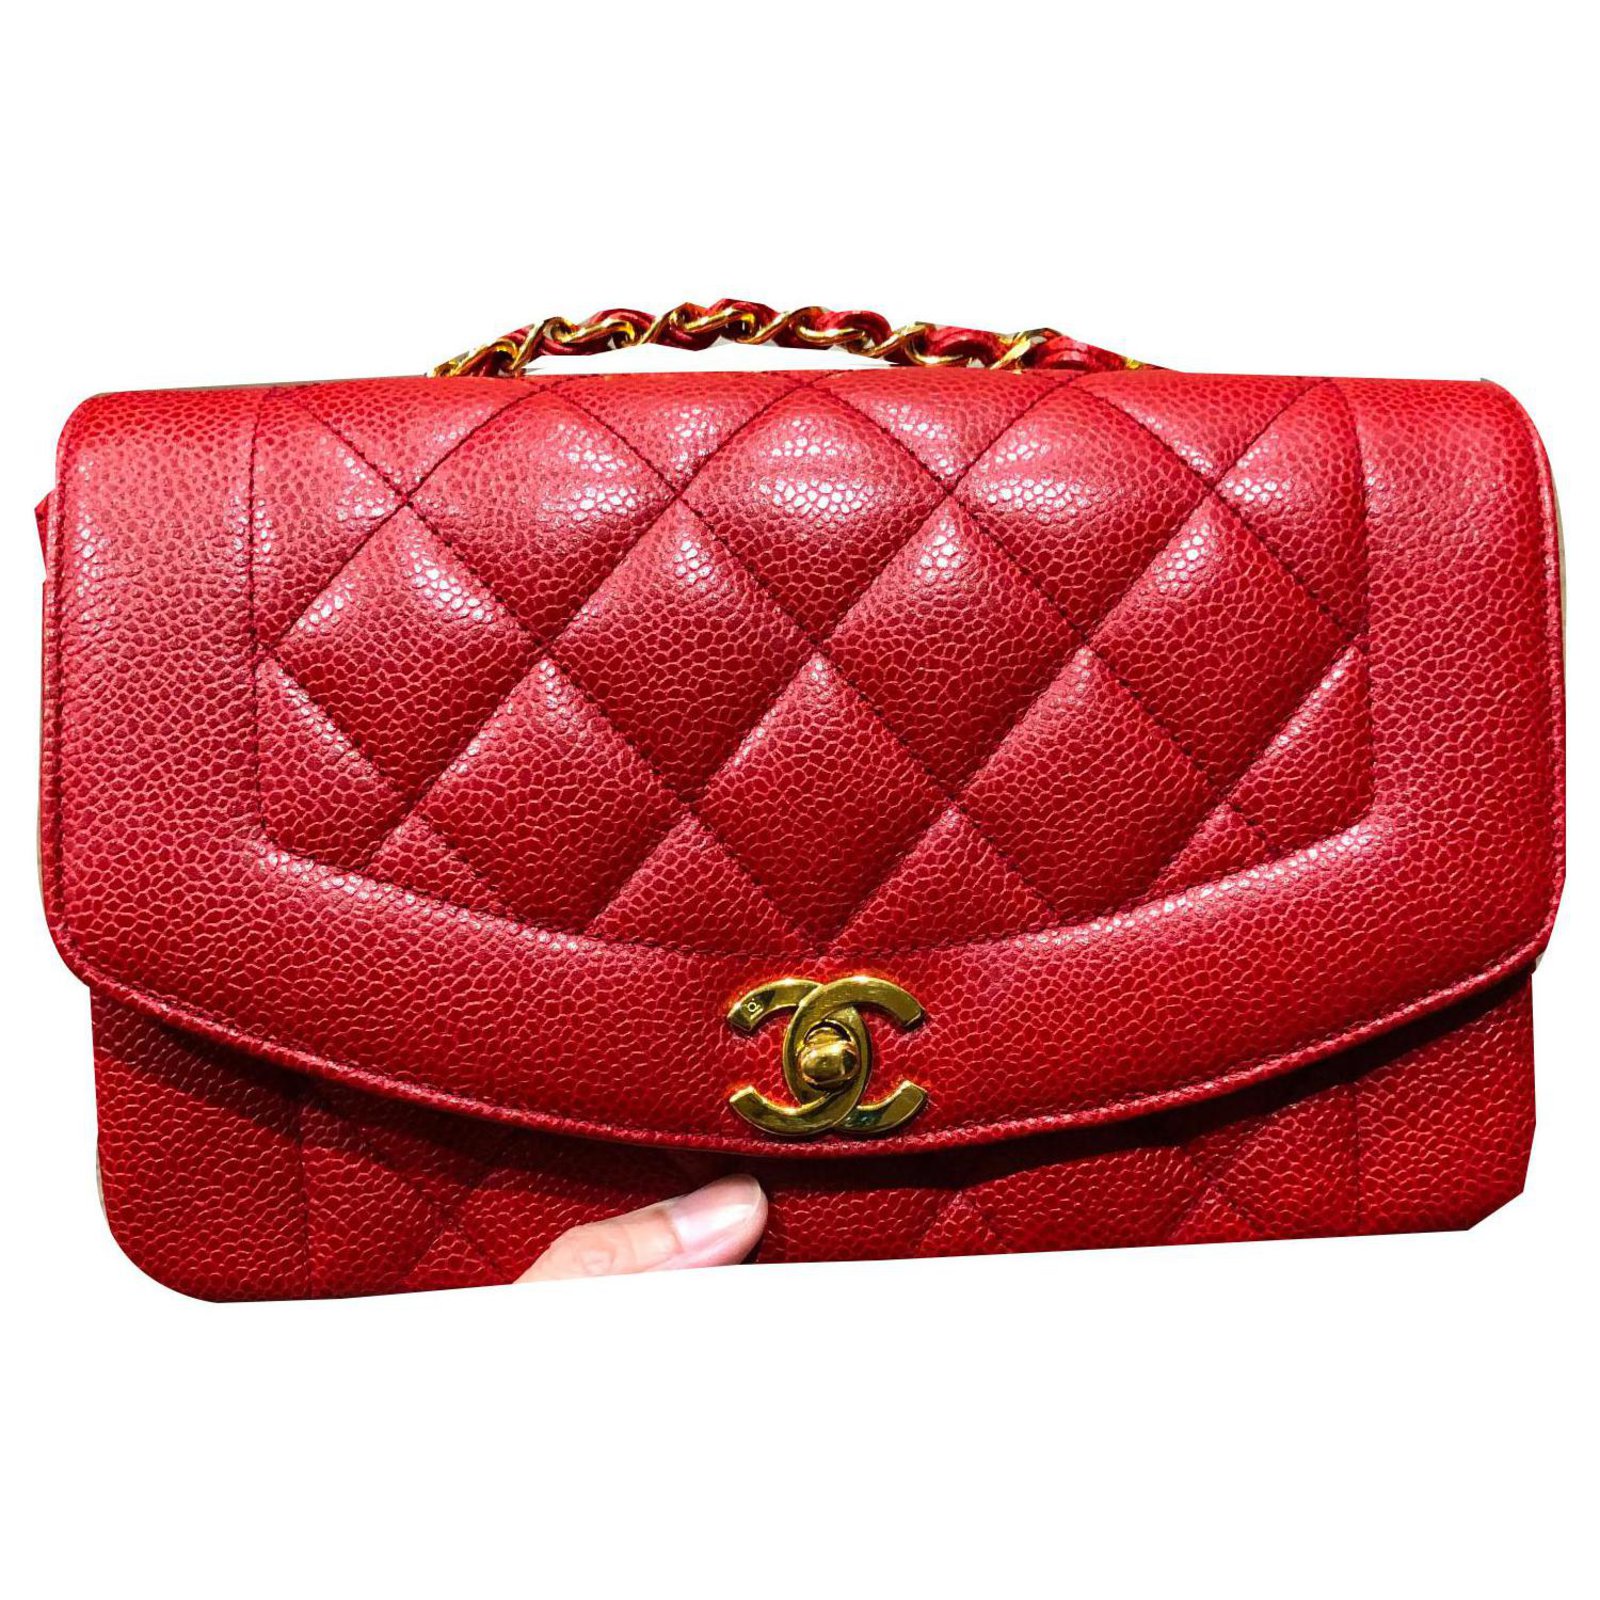 Chanel Rare Maxi Jumbo Quilted Vintage 90s Red Caviar Leather